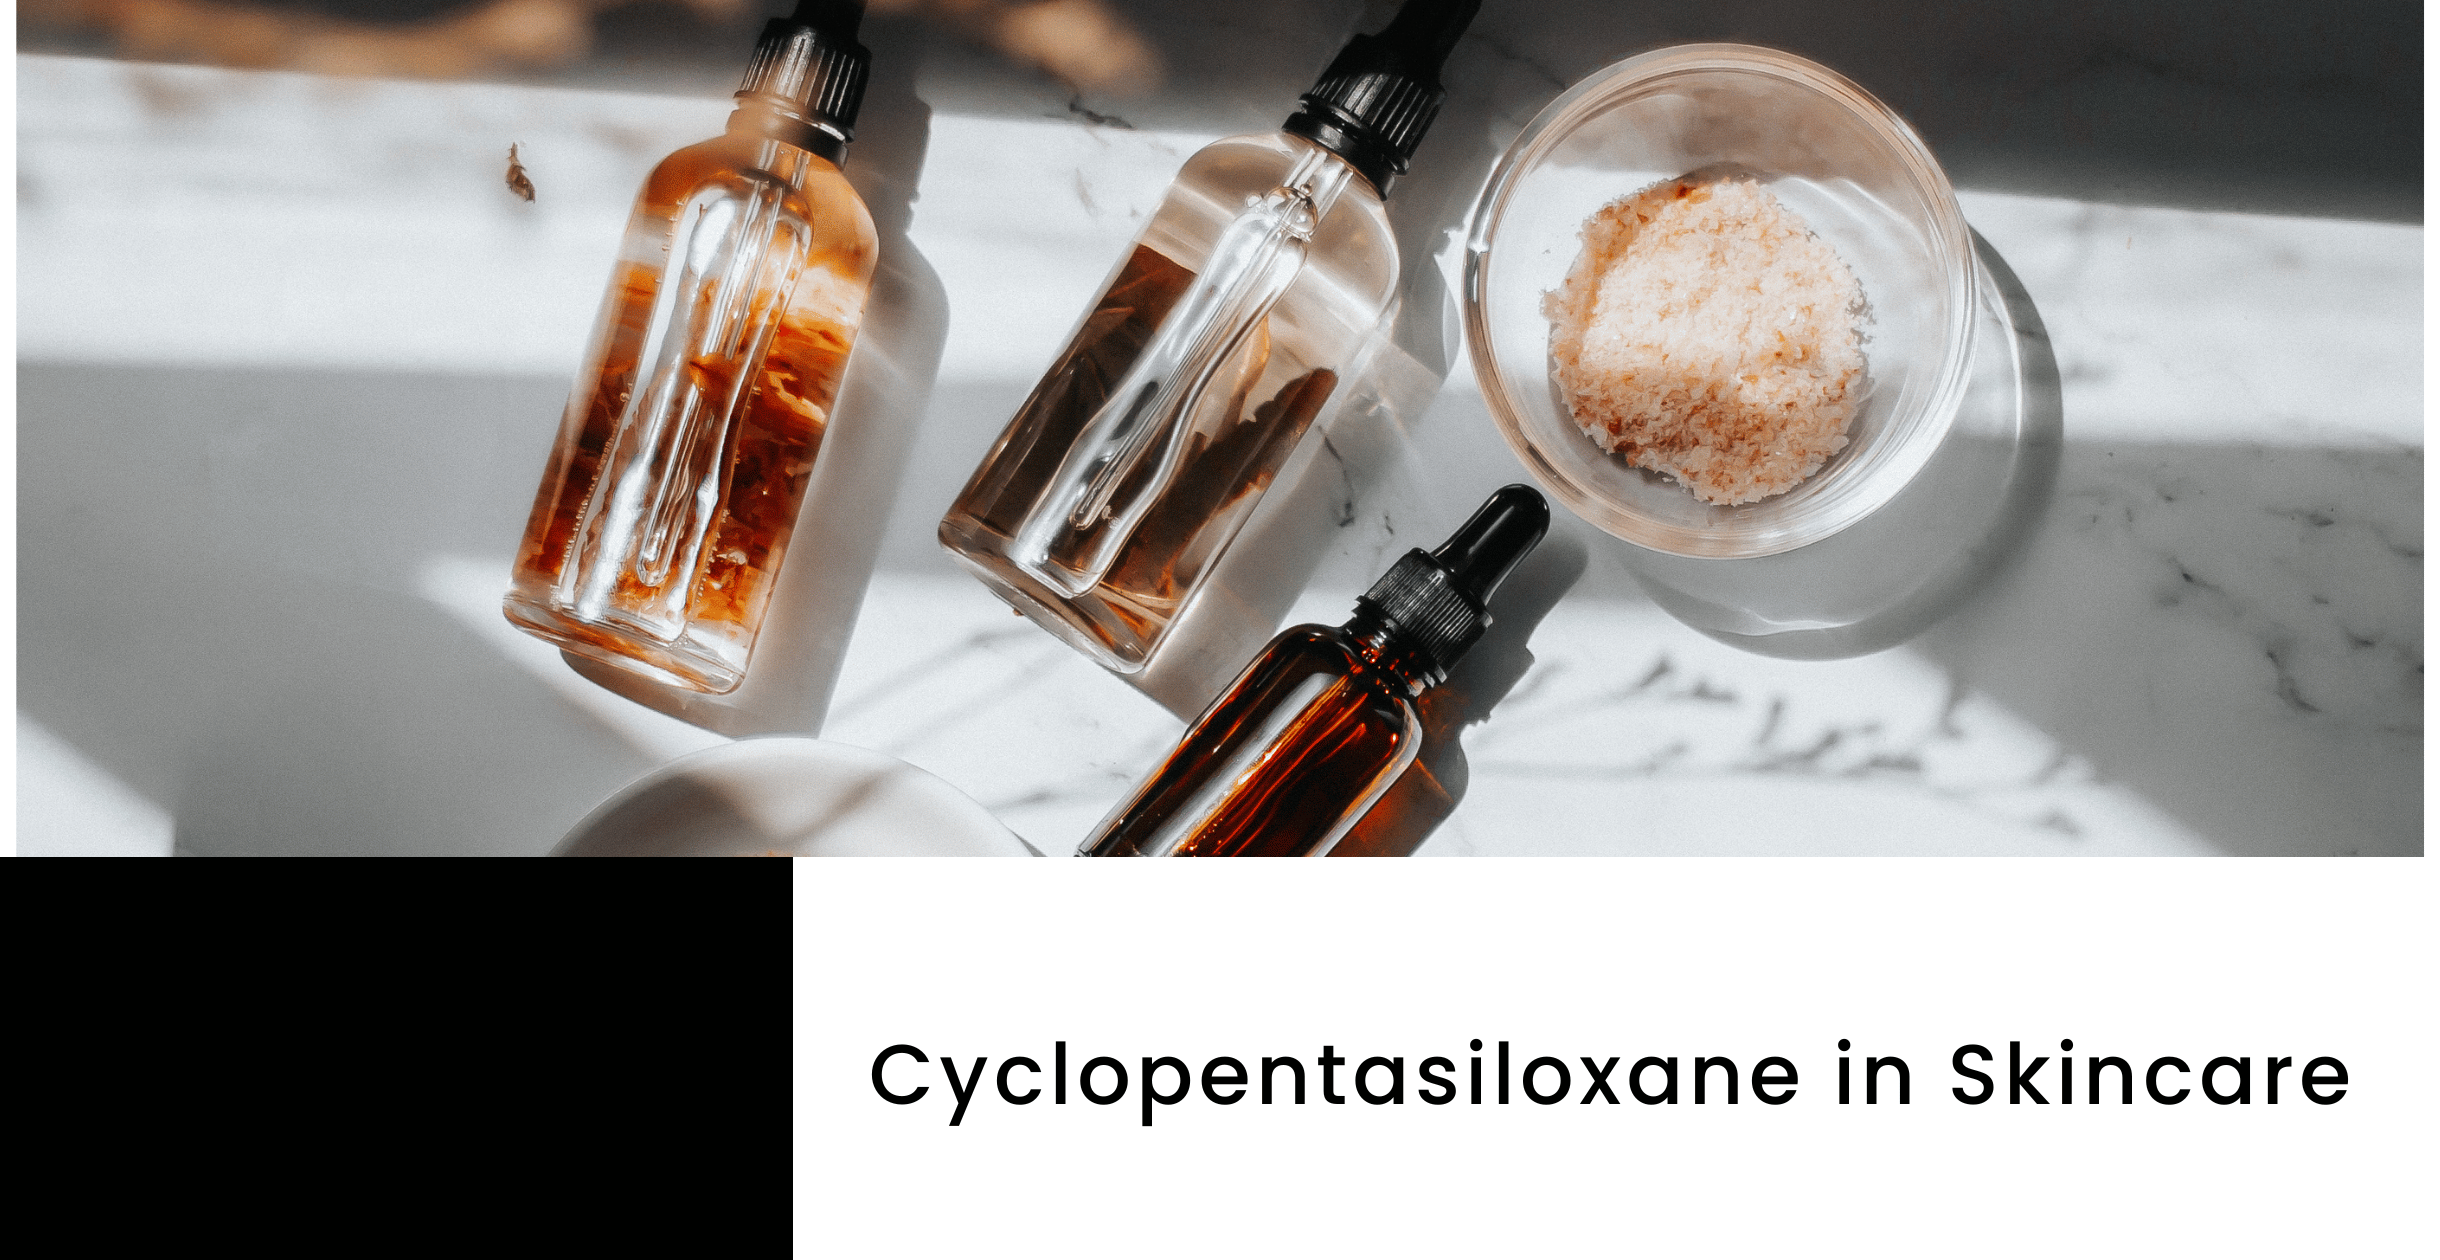 Cyclopentasiloxane in Skincare: Analysing Its Safety and Alternatives